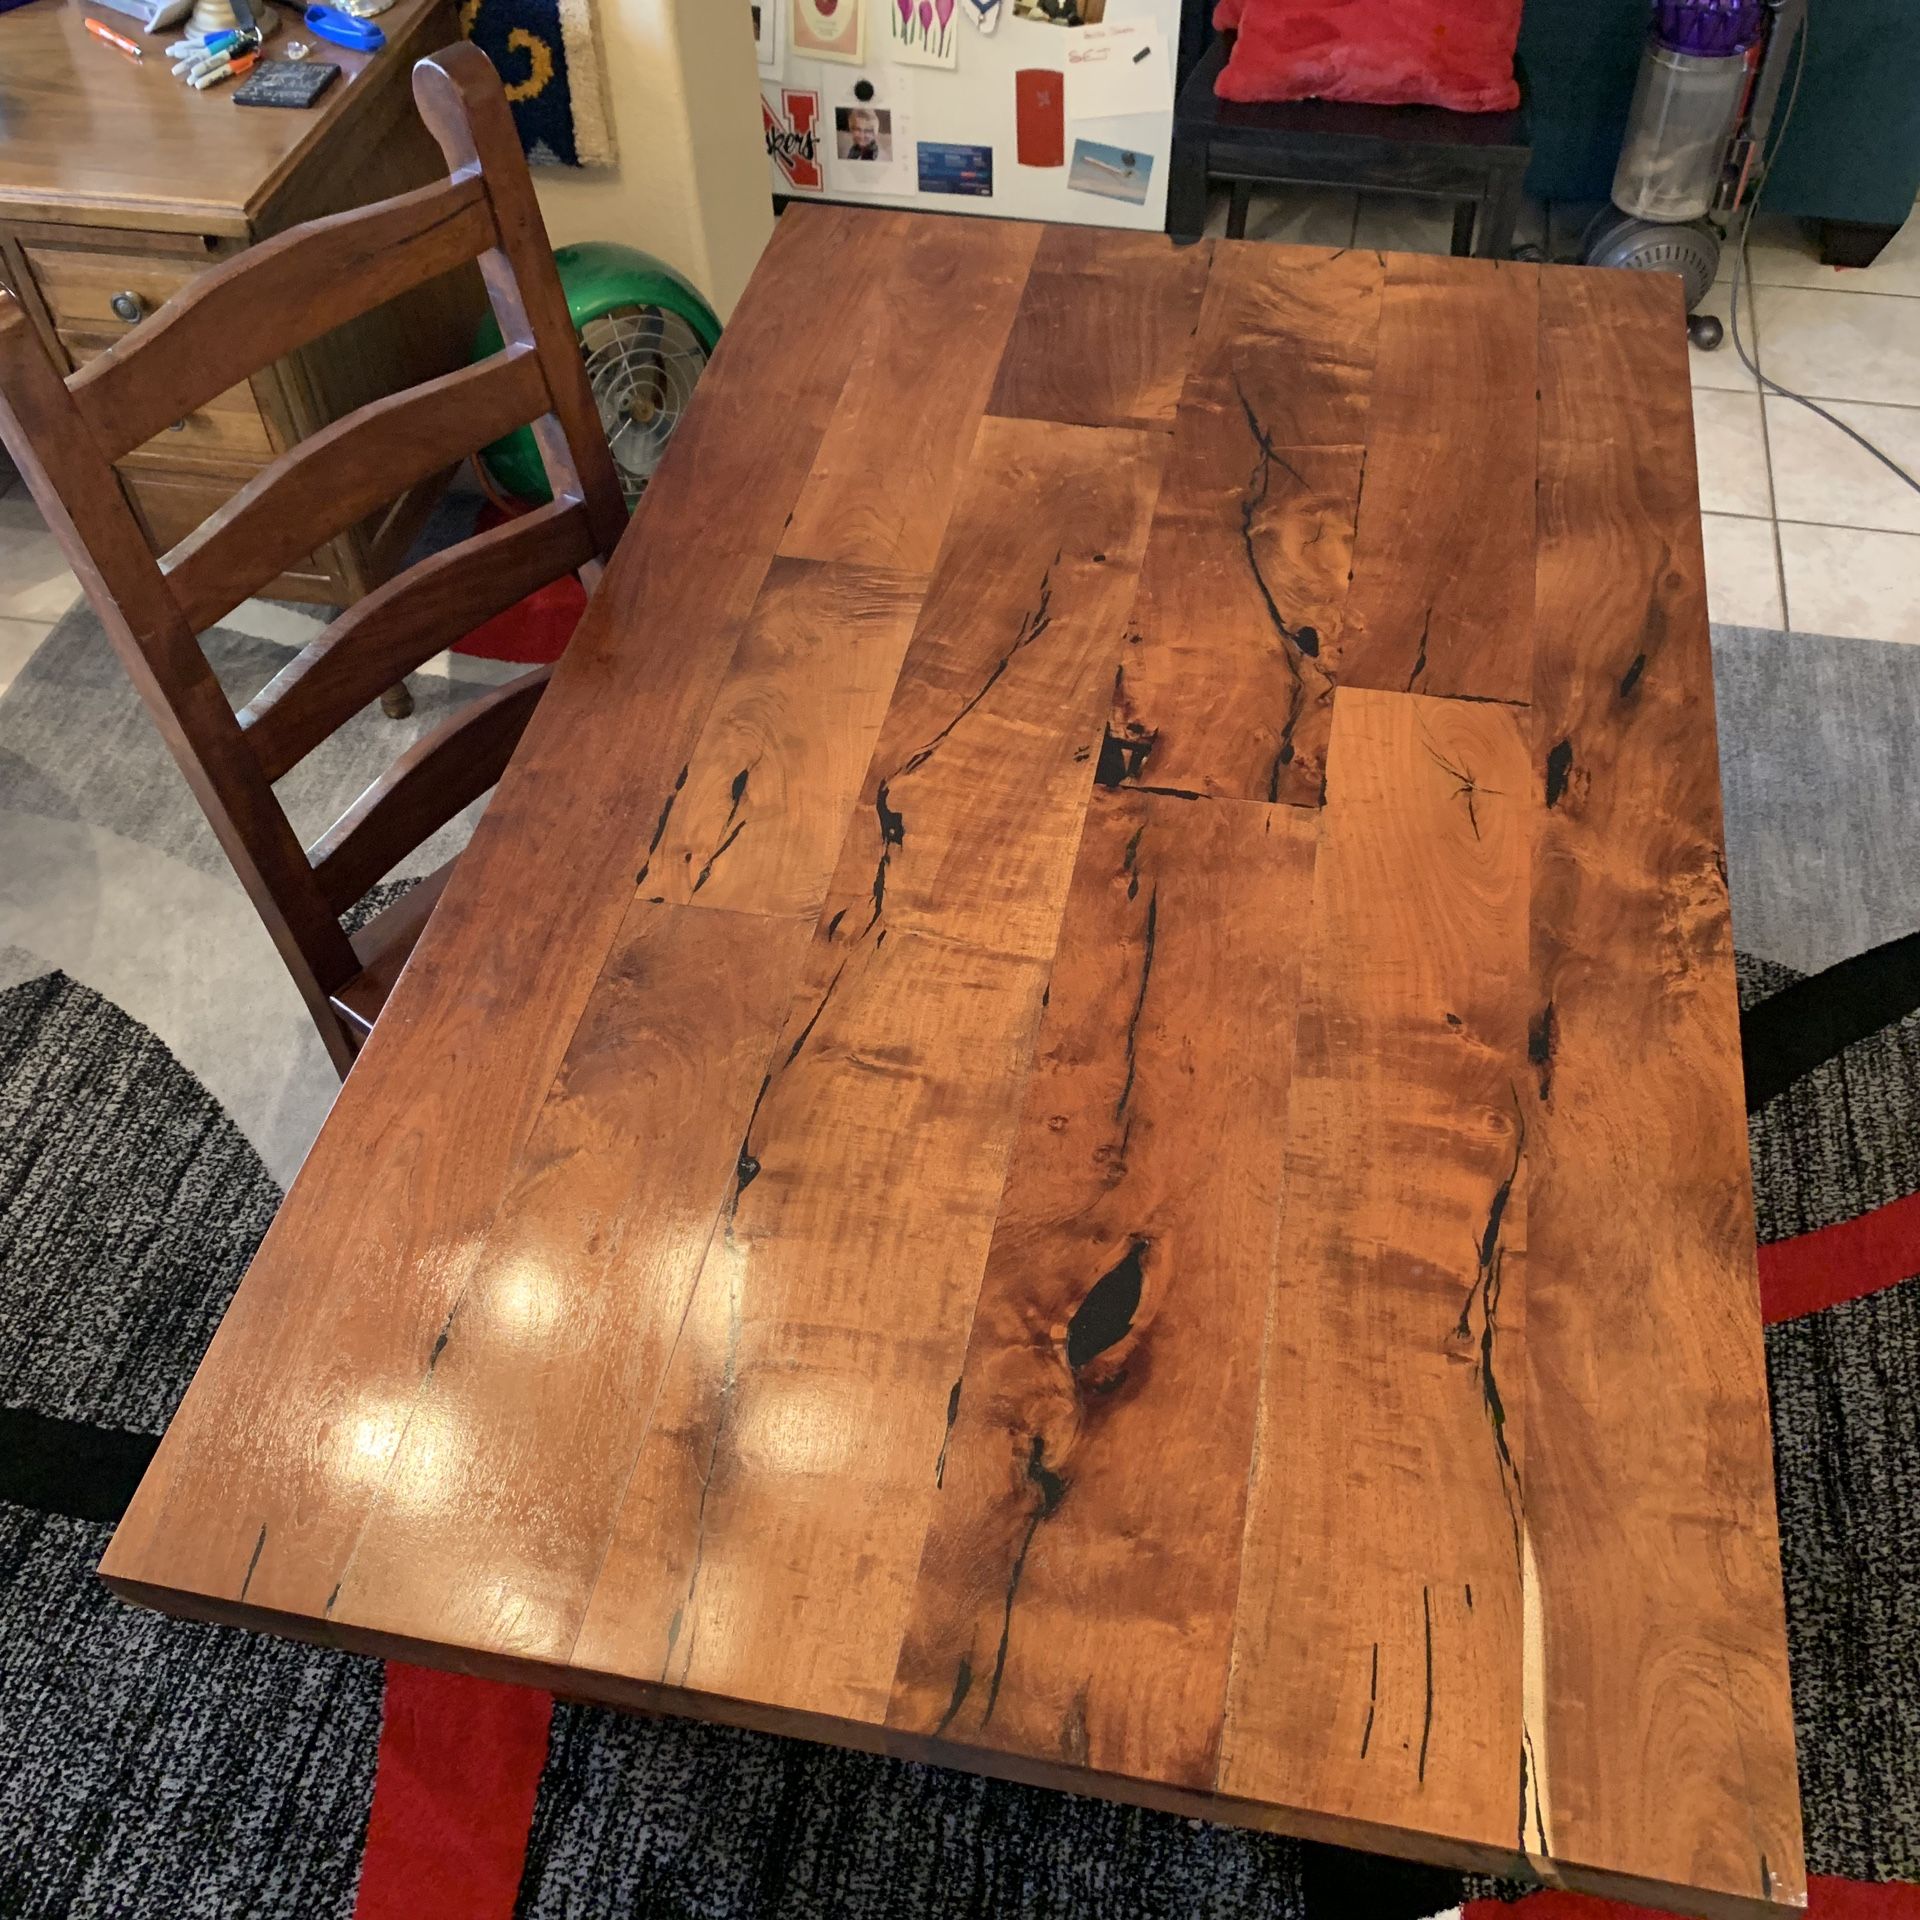 REDUCED $4100 to $3200: Custom, Solid Mesquite Wood Desk/Dining Table & Chair